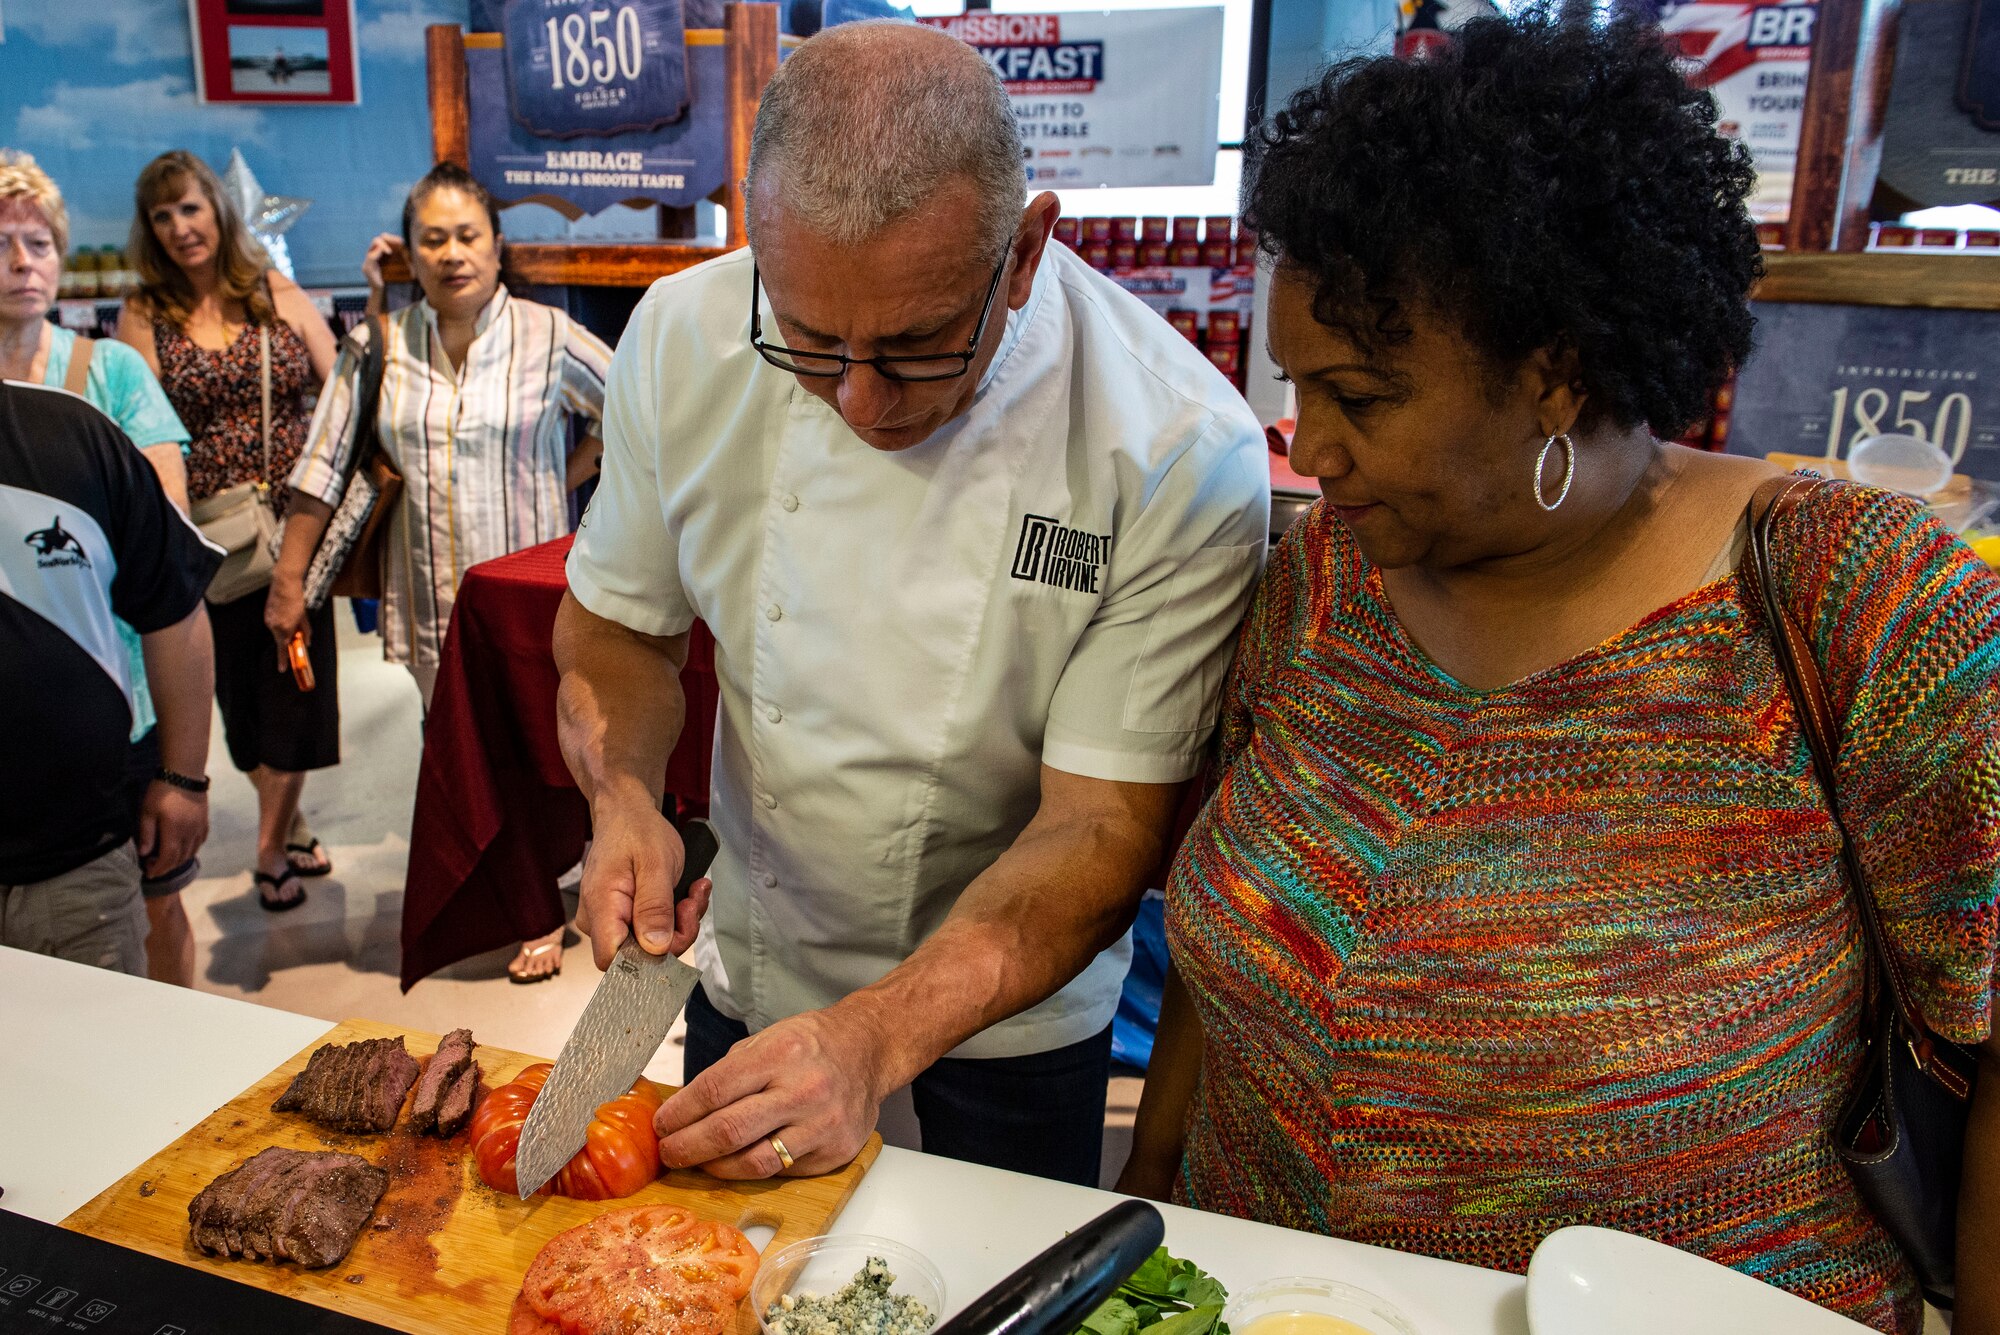 Celebrity chef Robert Irvine demonstrates proper cutting techniques during his presentation at the Nellis Commissary on Nellis Air Force Base, Nev., July 19, 2019.